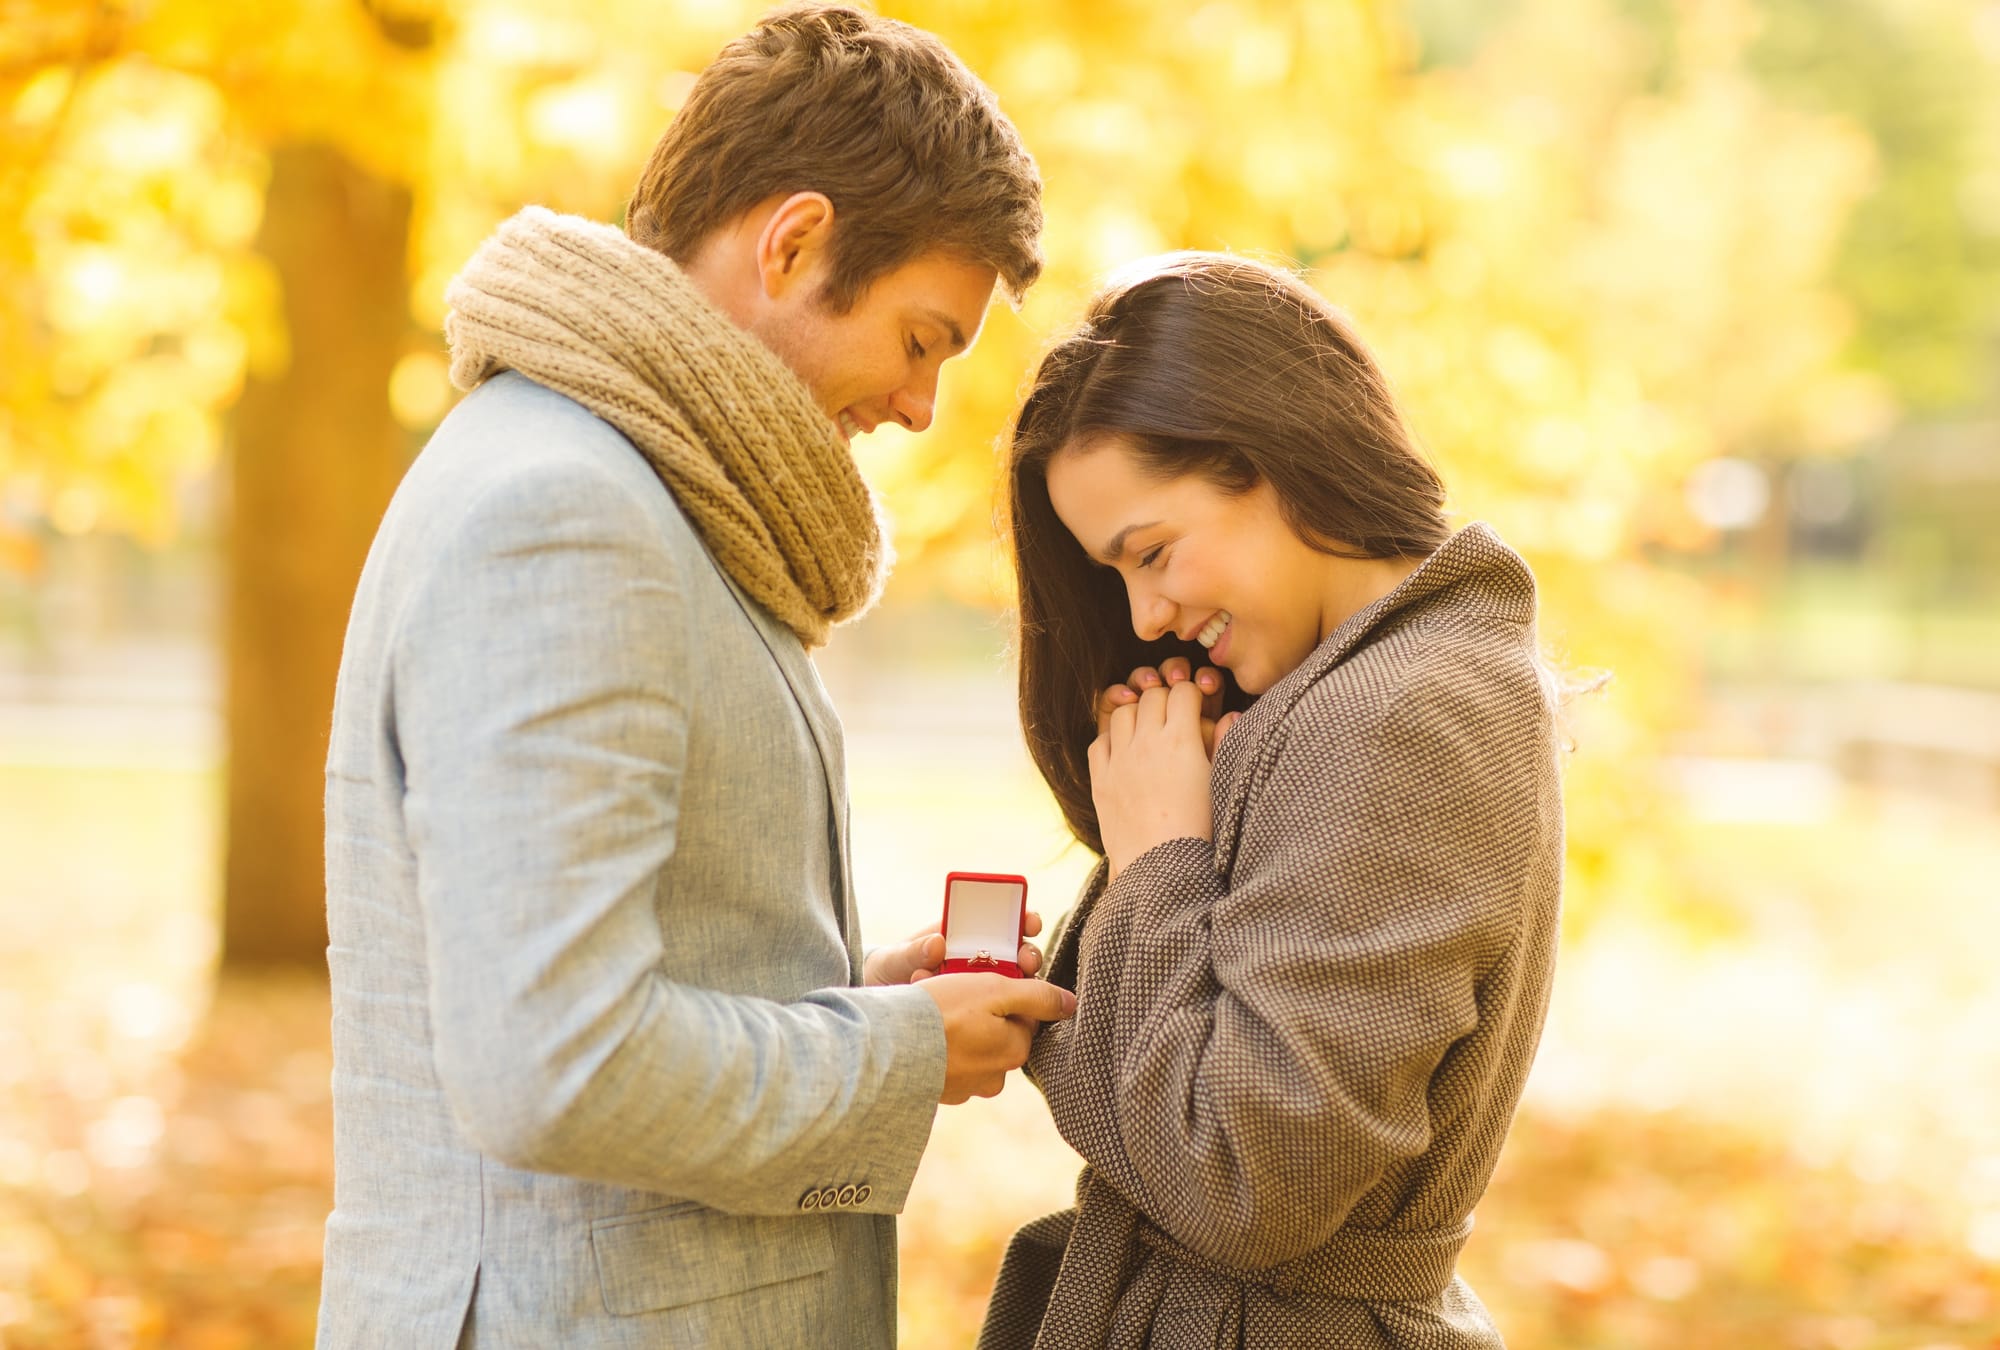 A happy couple under autumn trees. The man is proposing, presenting the woman with a red engagement ring box.